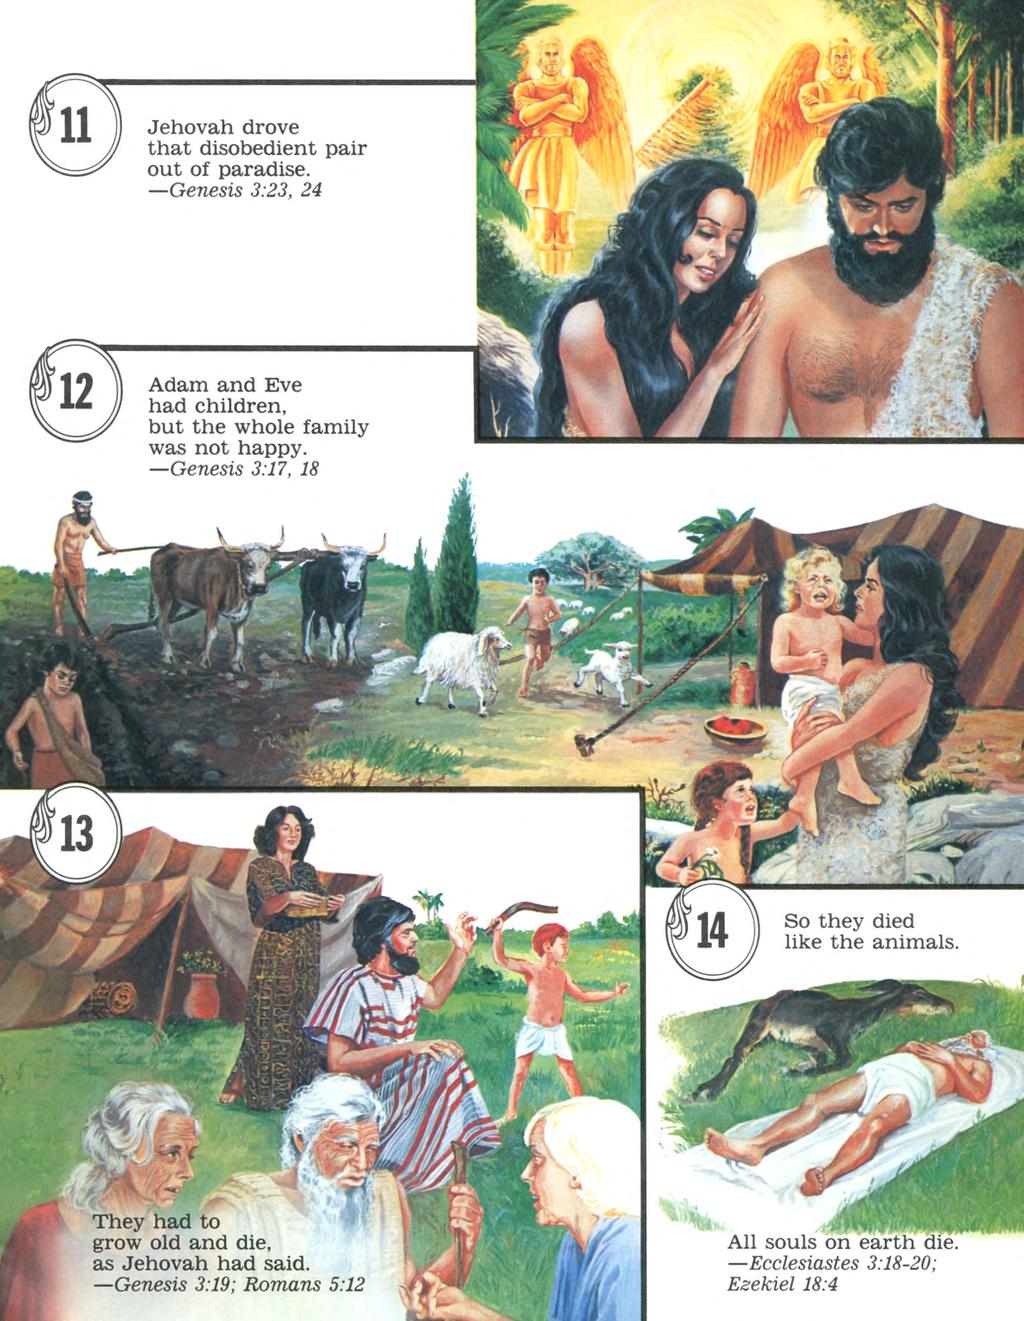 11 Jehovah drove th a t disobedient pair out of paradise. Genesis 3:23, 24 12 Adam and Eve had children, but the whole family was not happy.